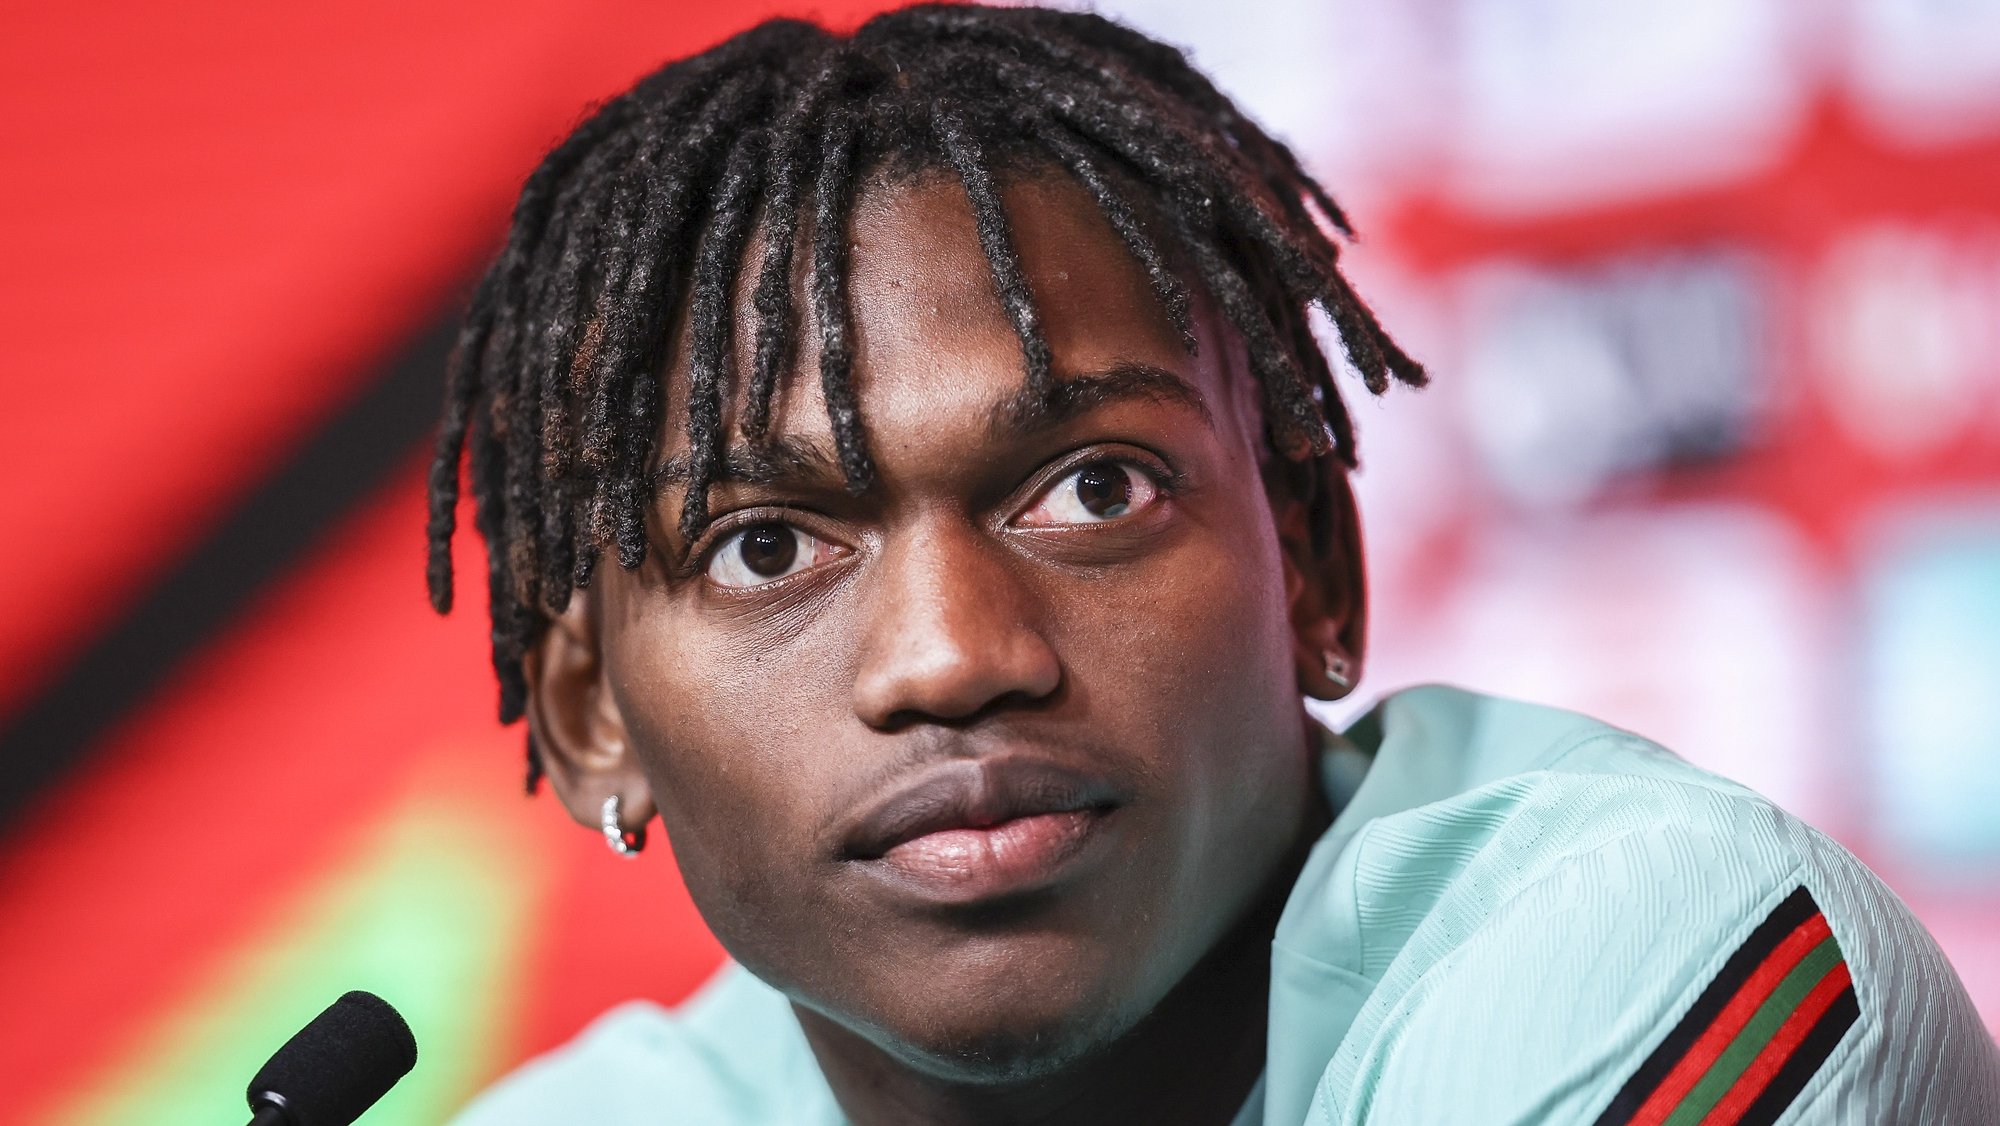 Portugal&#039;s player Rafael Leao attends a press conference at Cidade do Futebol in Oeiras, outskirts of Lisbon, Portugal, 27 May 2022. Portugal will play against Spain, Check Republic and Switzerland for the upcoming UEFA Nations League in June. RODRIGO ANTUNES/LUSA